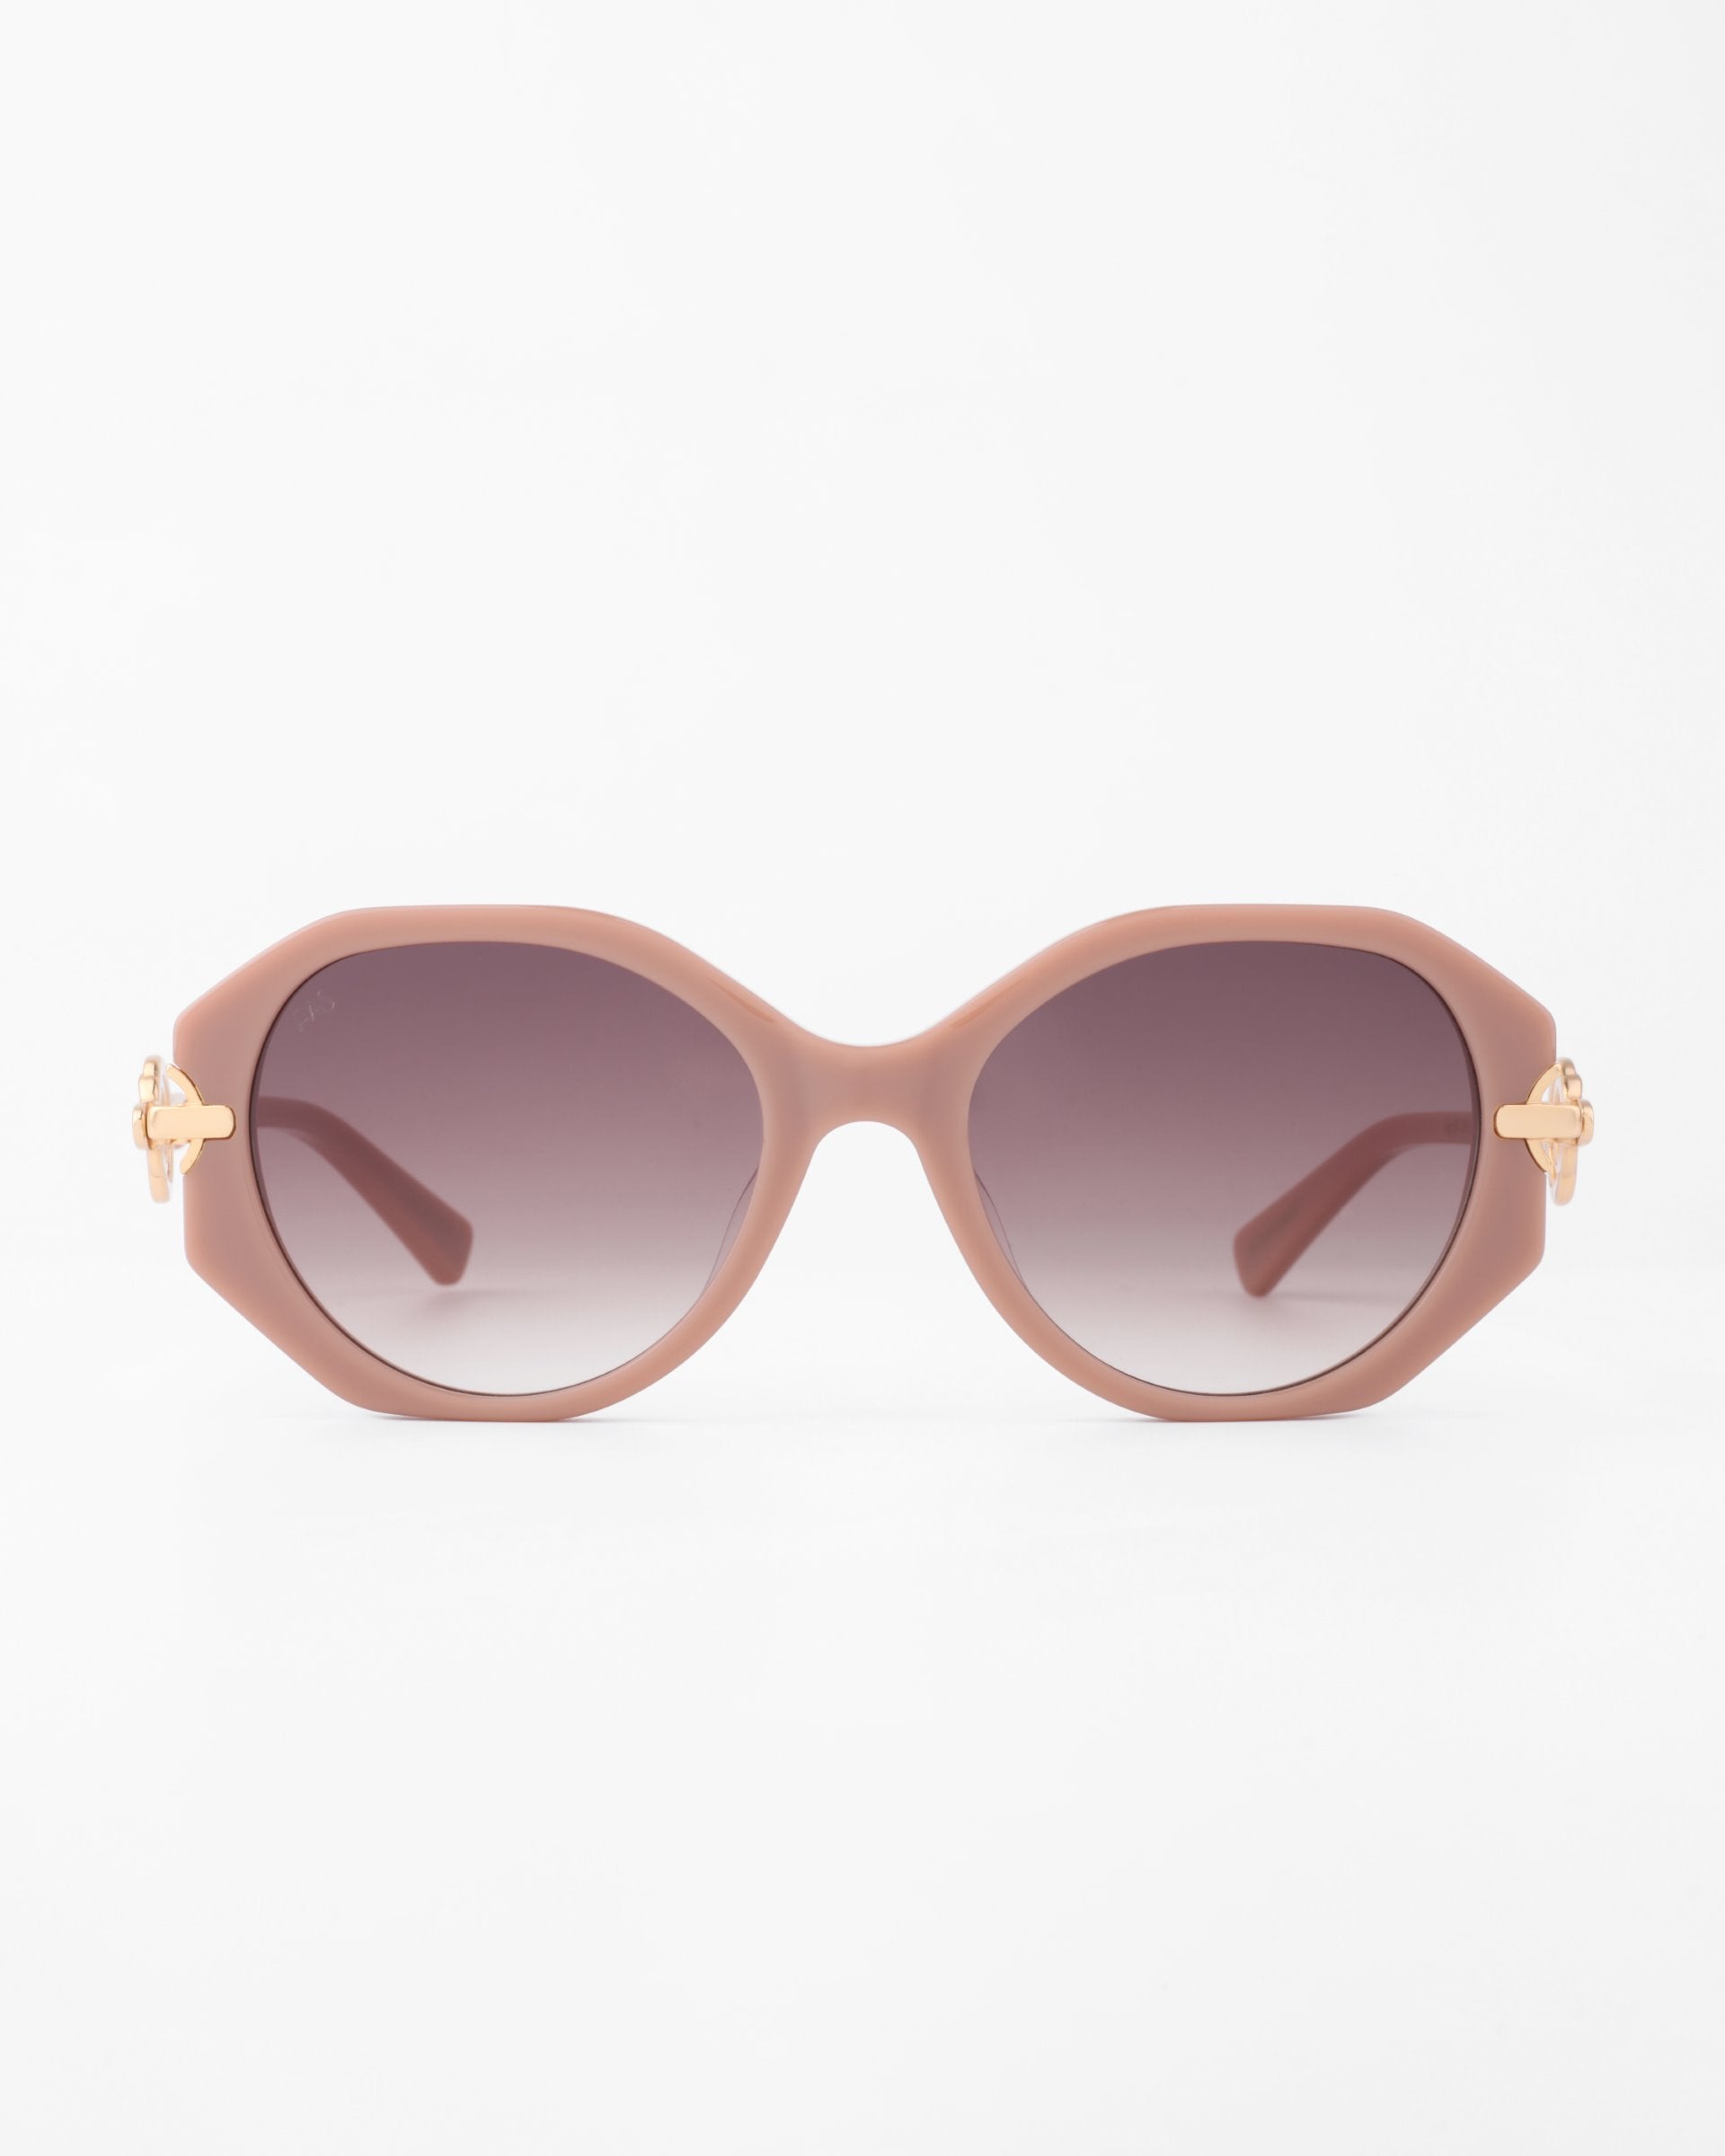 A pair of oversized, rounded sunglasses with light pink, handmade acetate frames and gradient dark lenses. The temples are adorned with gold-plated detailing on each side, adding a touch of elegance to the design. This is the For Art's Sake® Seaside model. The background is plain white.